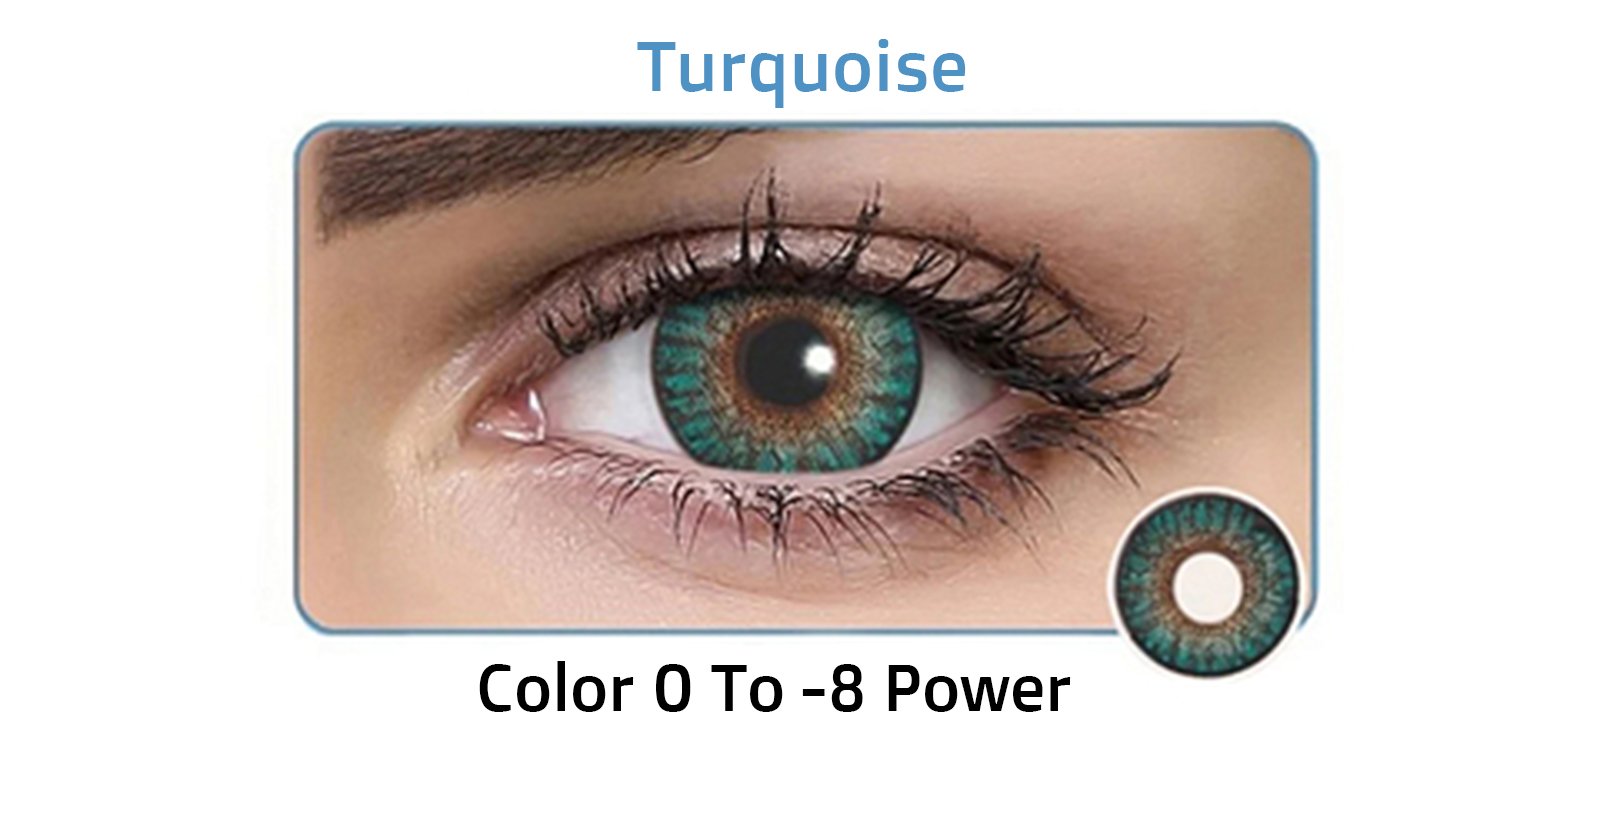 Freshlook Colorblends Monthly Disposable Turquoise Color